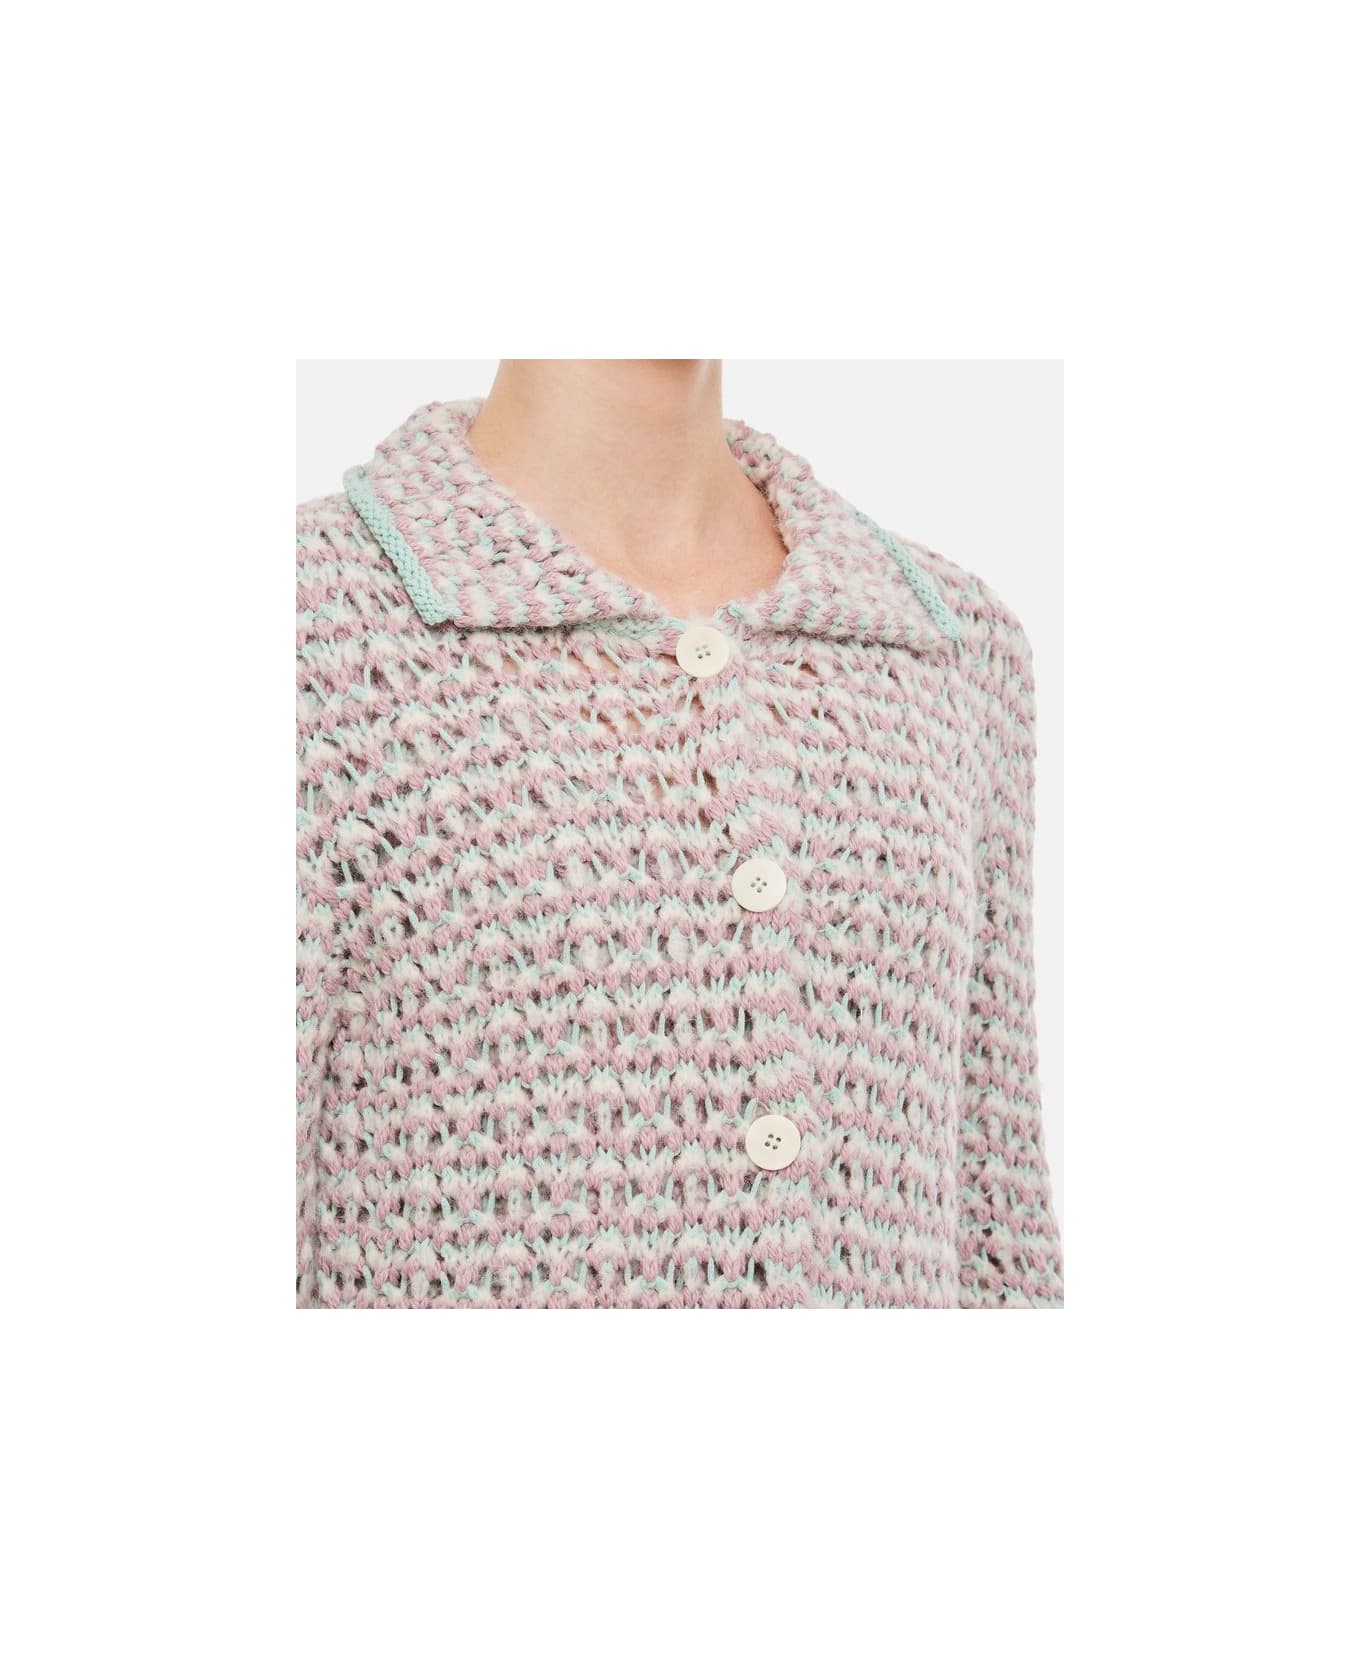 Marco Rambaldi Multicolor Braided Knitted Shirt - Rose